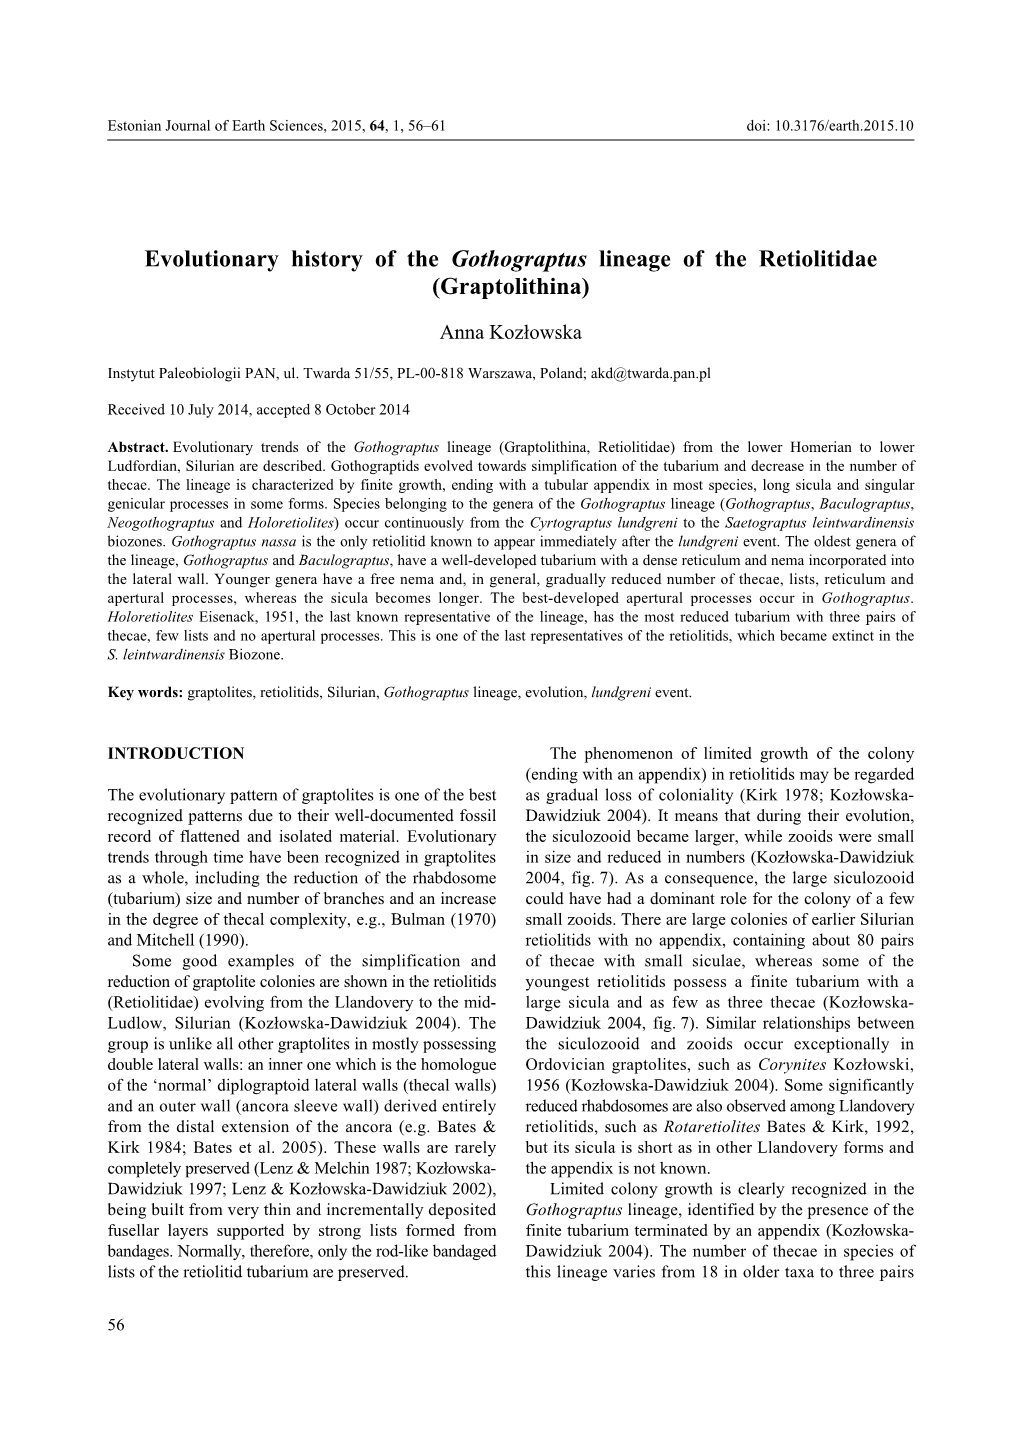 Evolutionary History of the Gothograptus Lineage of the Retiolitidae (Graptolithina)